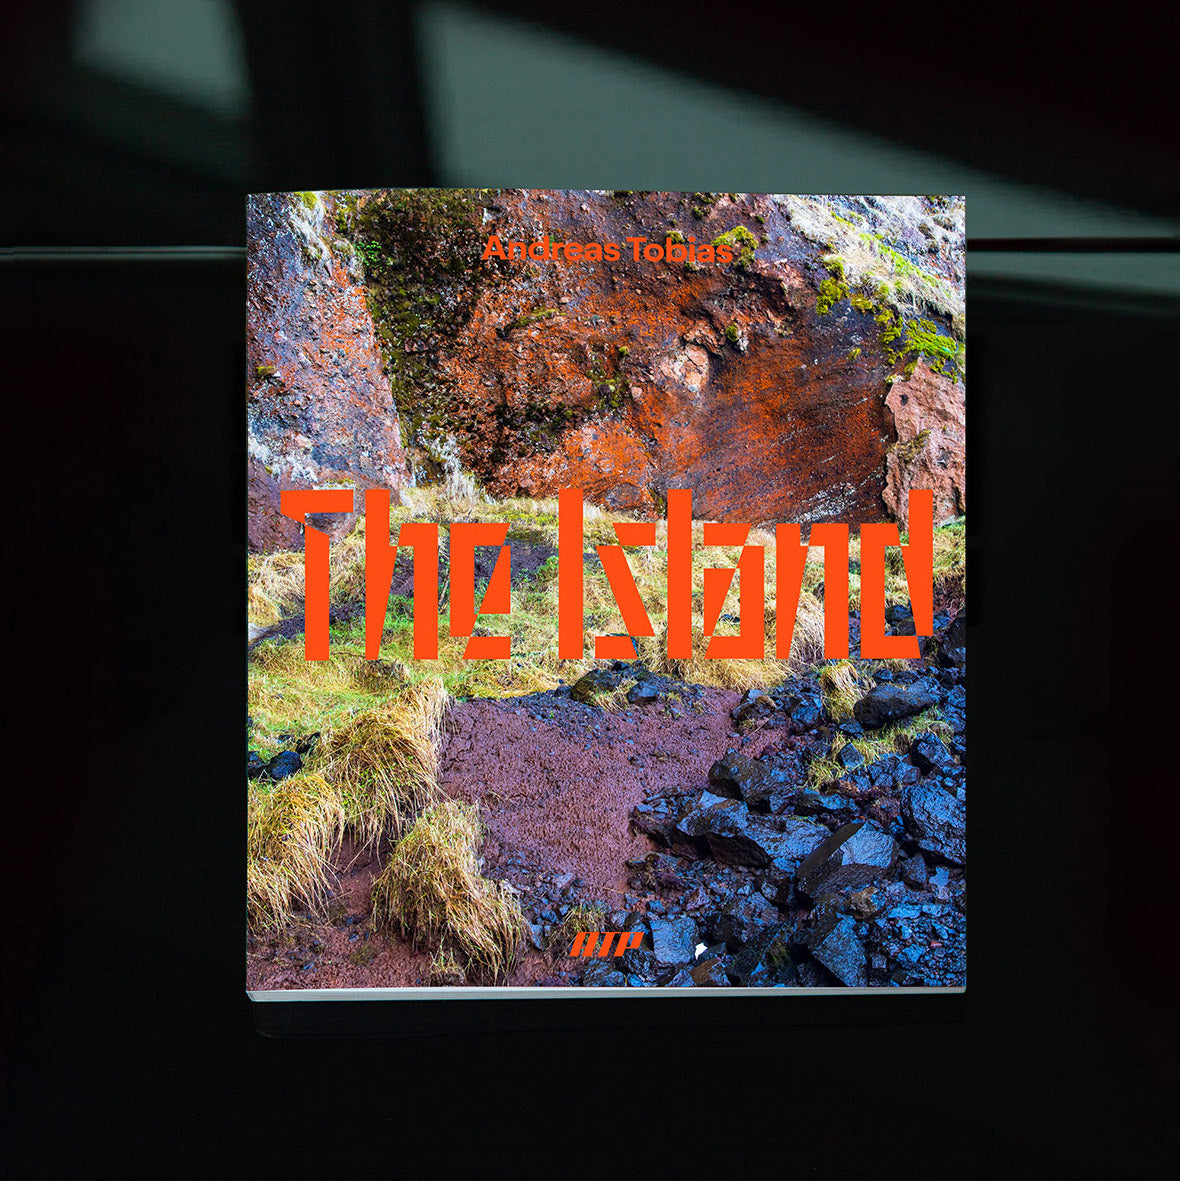 THE ISLAND – The Book